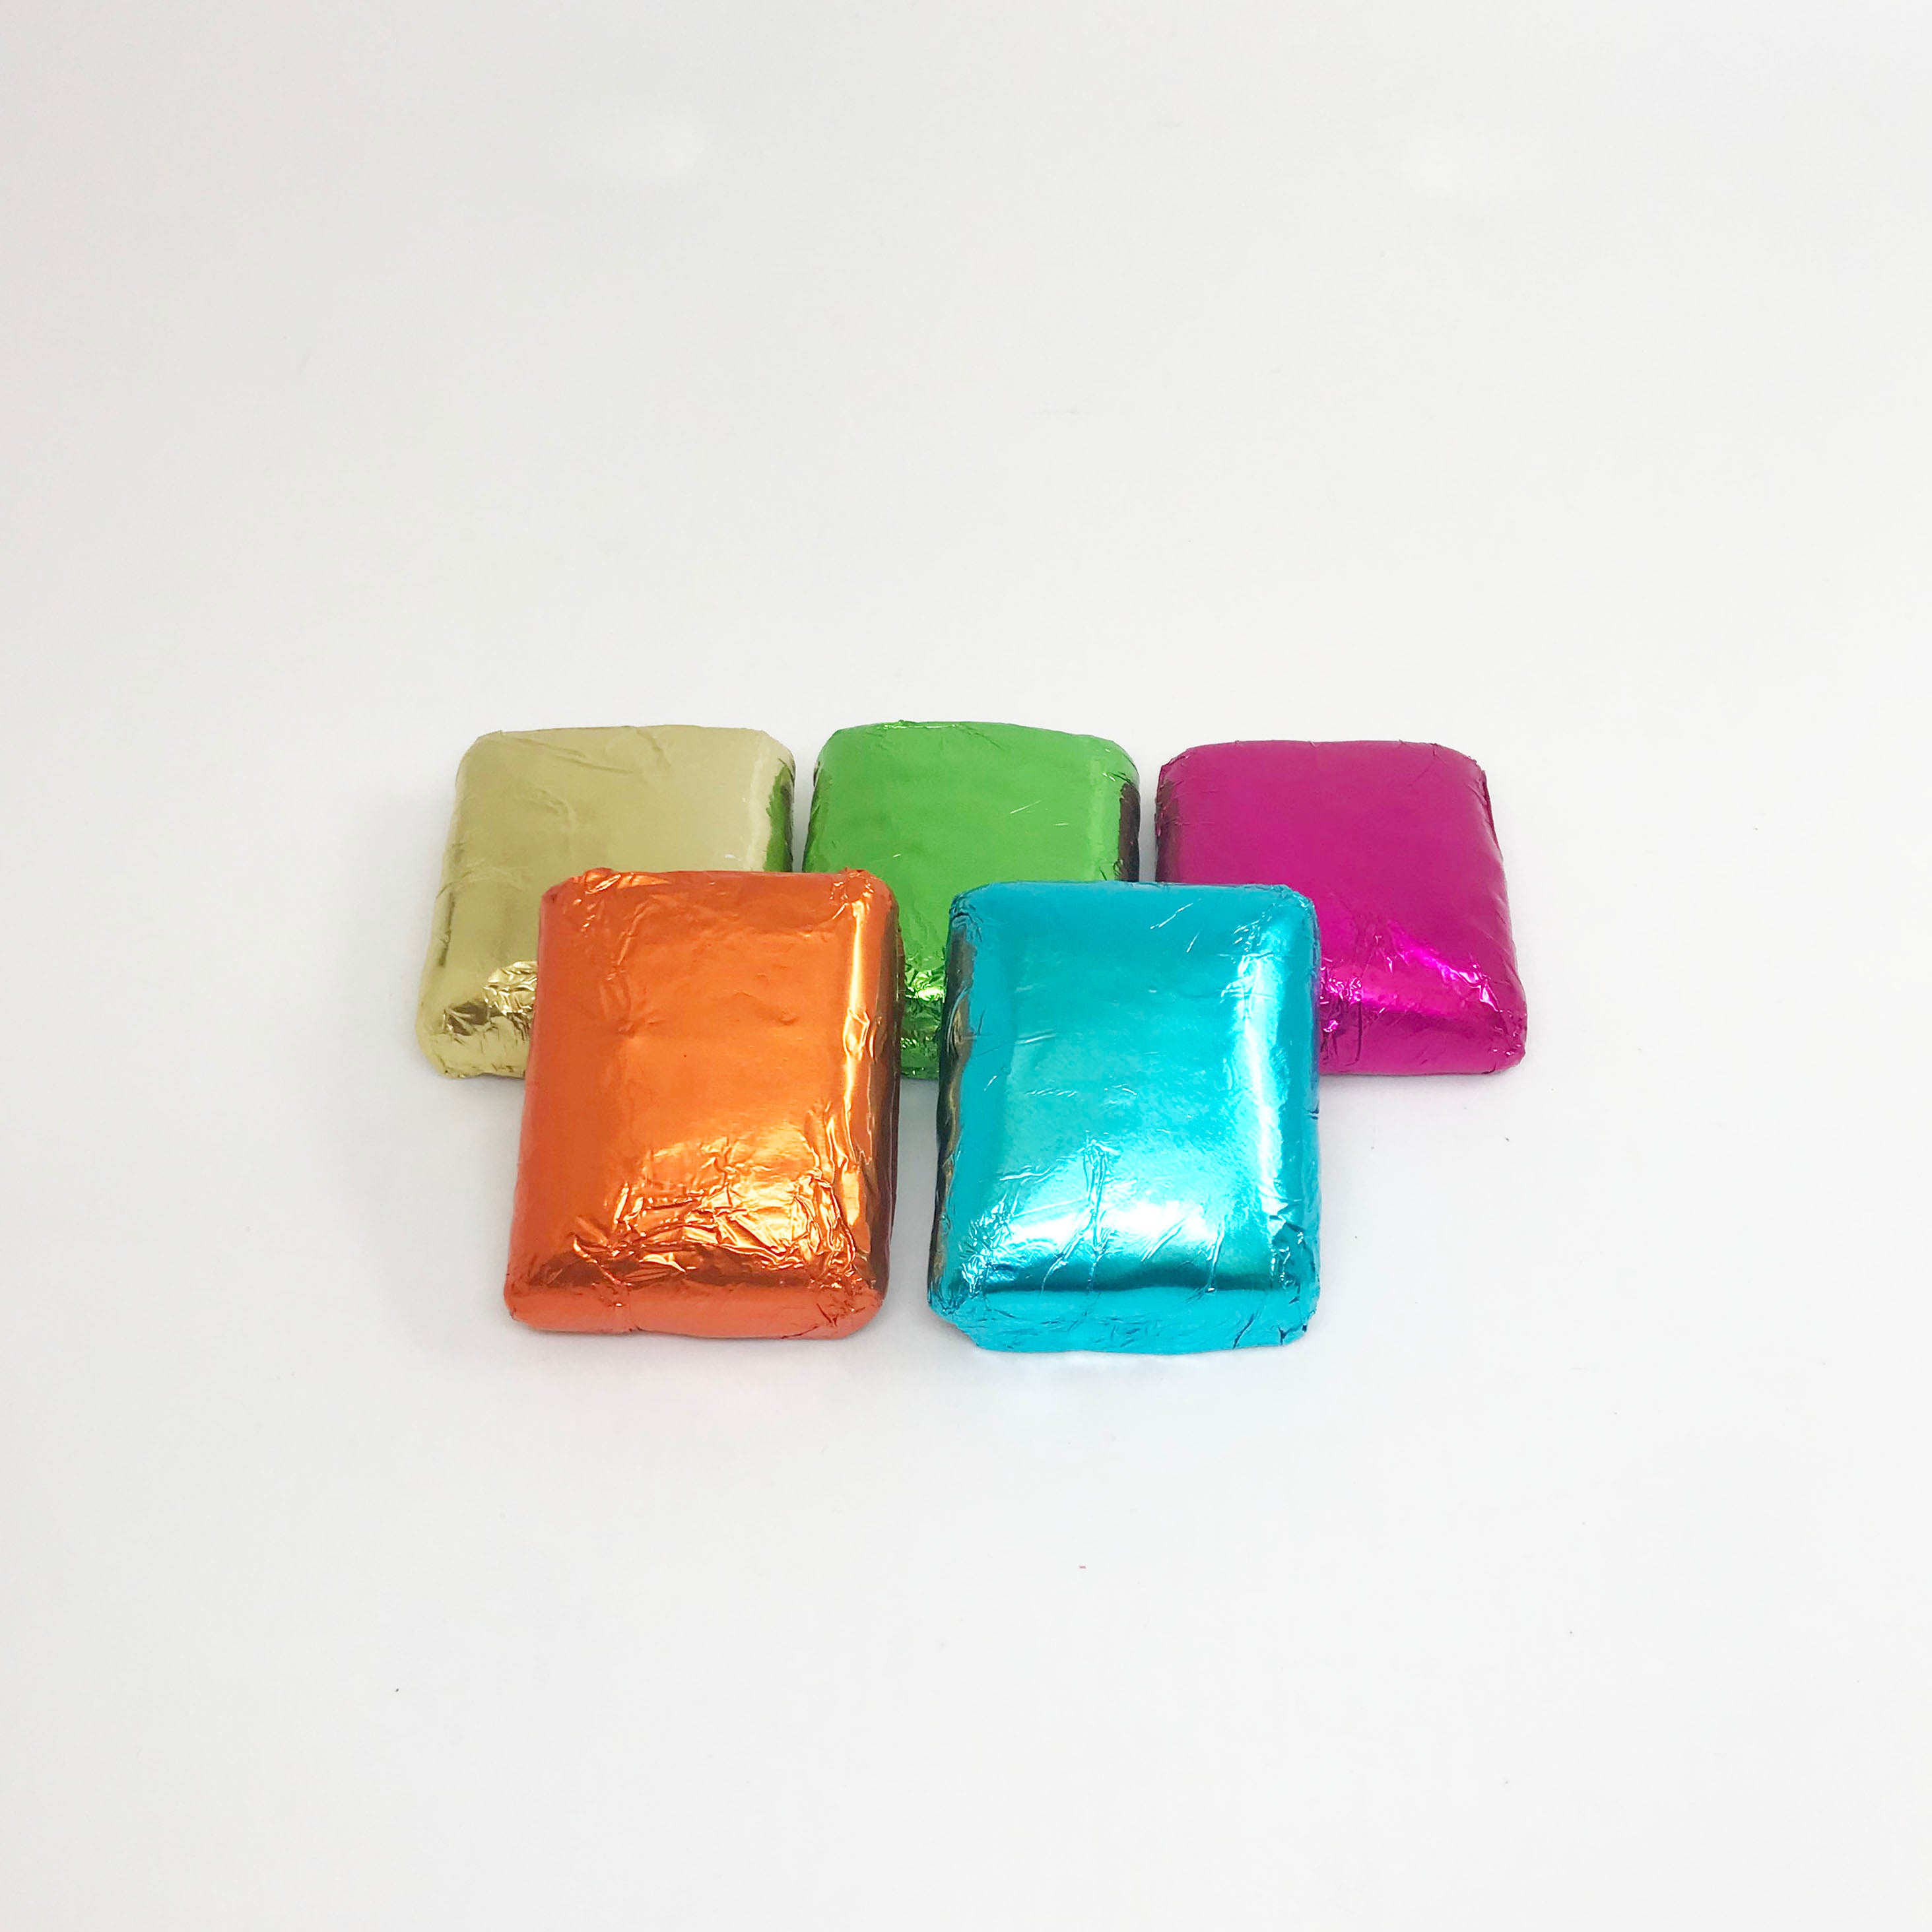 Foiled Marzipan Squares